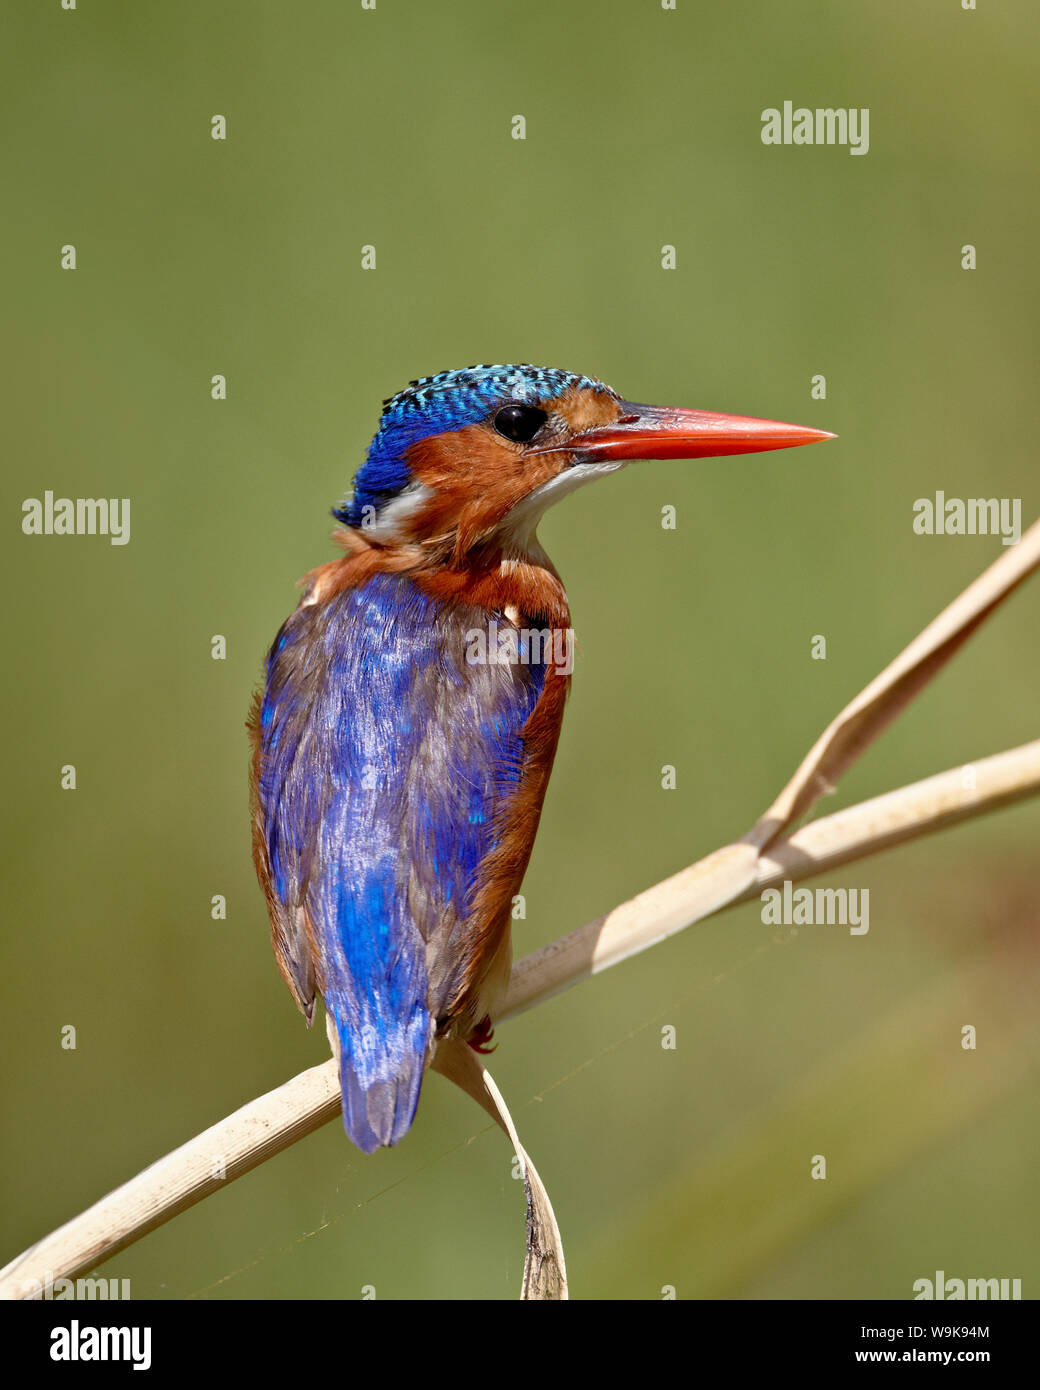 Malachite kingfisher (Alcedo cristata), Kruger National Park, South Africa, Africa Stock Photo